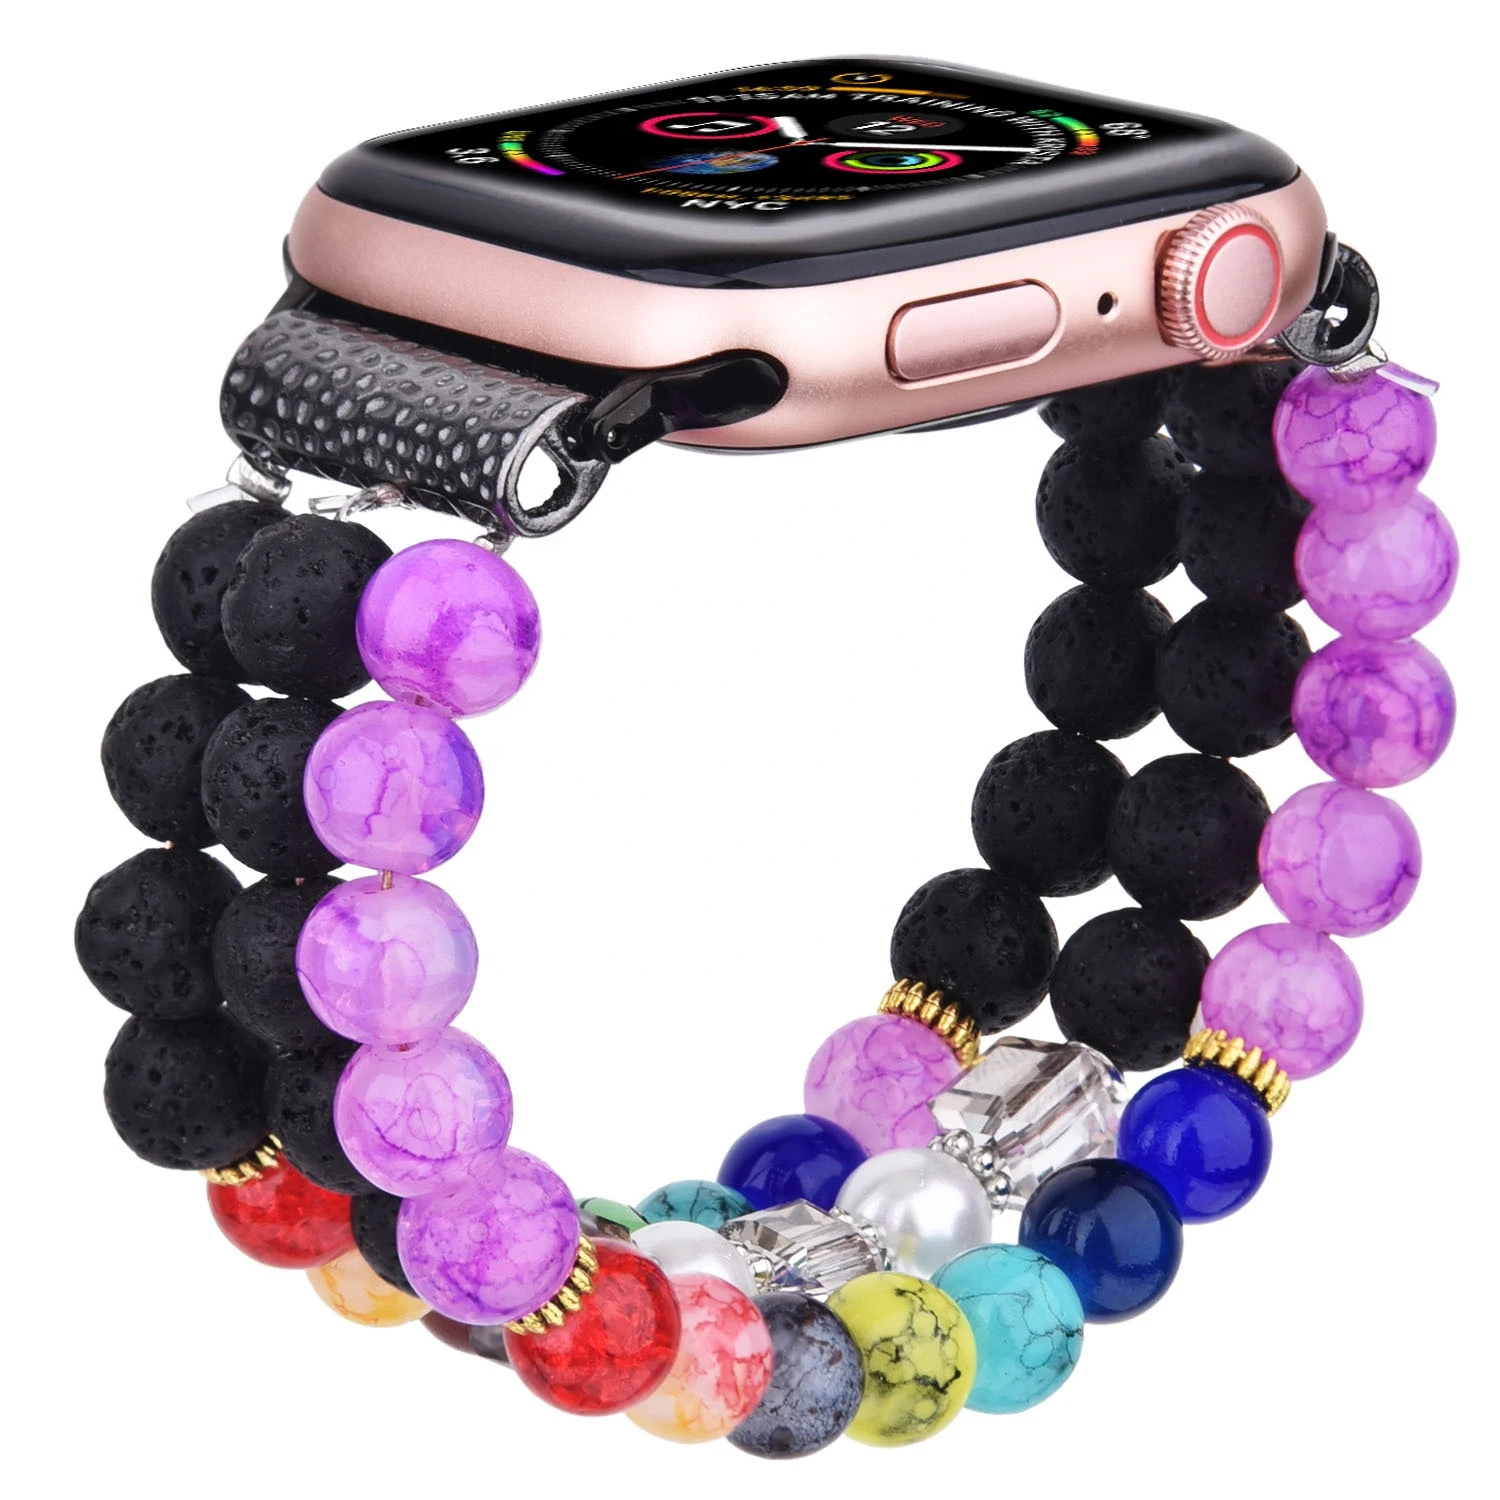 Beads watch Strap for iwatch 6, Ladies Charming Beads Watch Bands for Watch 6 Wrist band 22mm steel bracelet for iwatch series 6